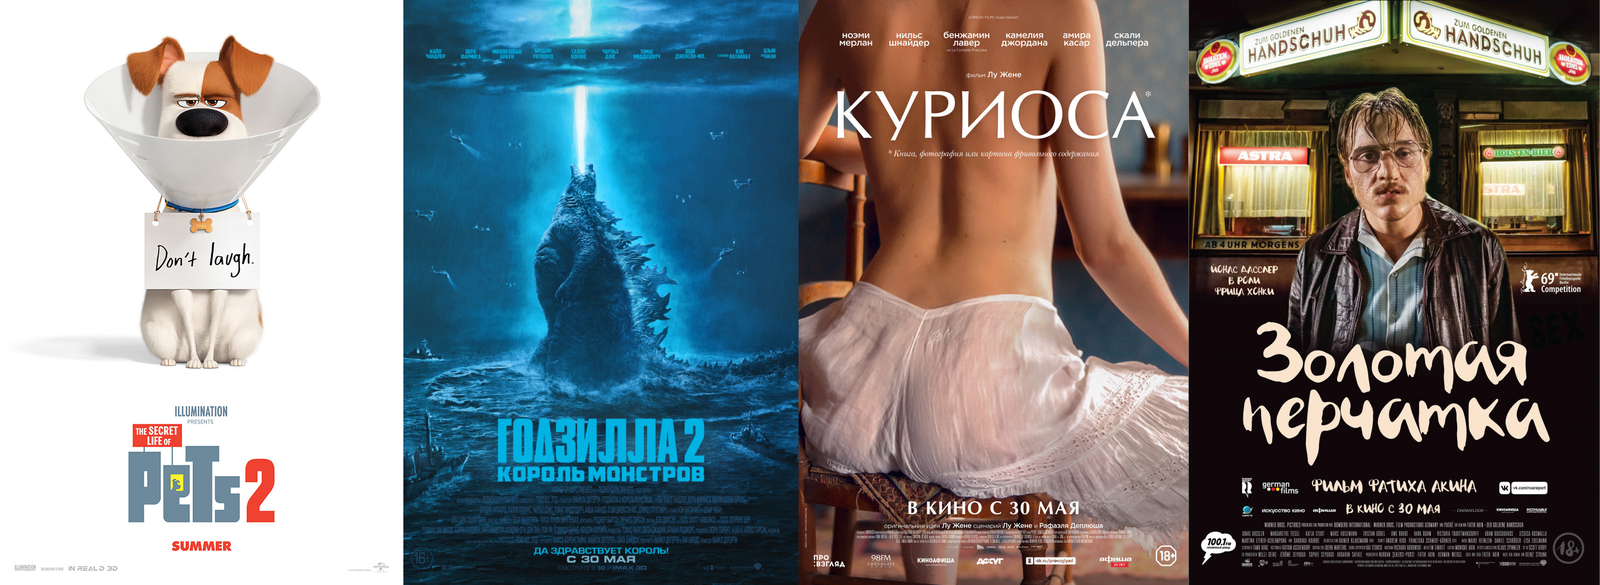 Russian box office receipts and distribution of screenings over the past weekend (May 30 - June 2) - Movies, Box office fees, Film distribution, The Secret Life of Pets, Godzilla 2: King of the Monsters